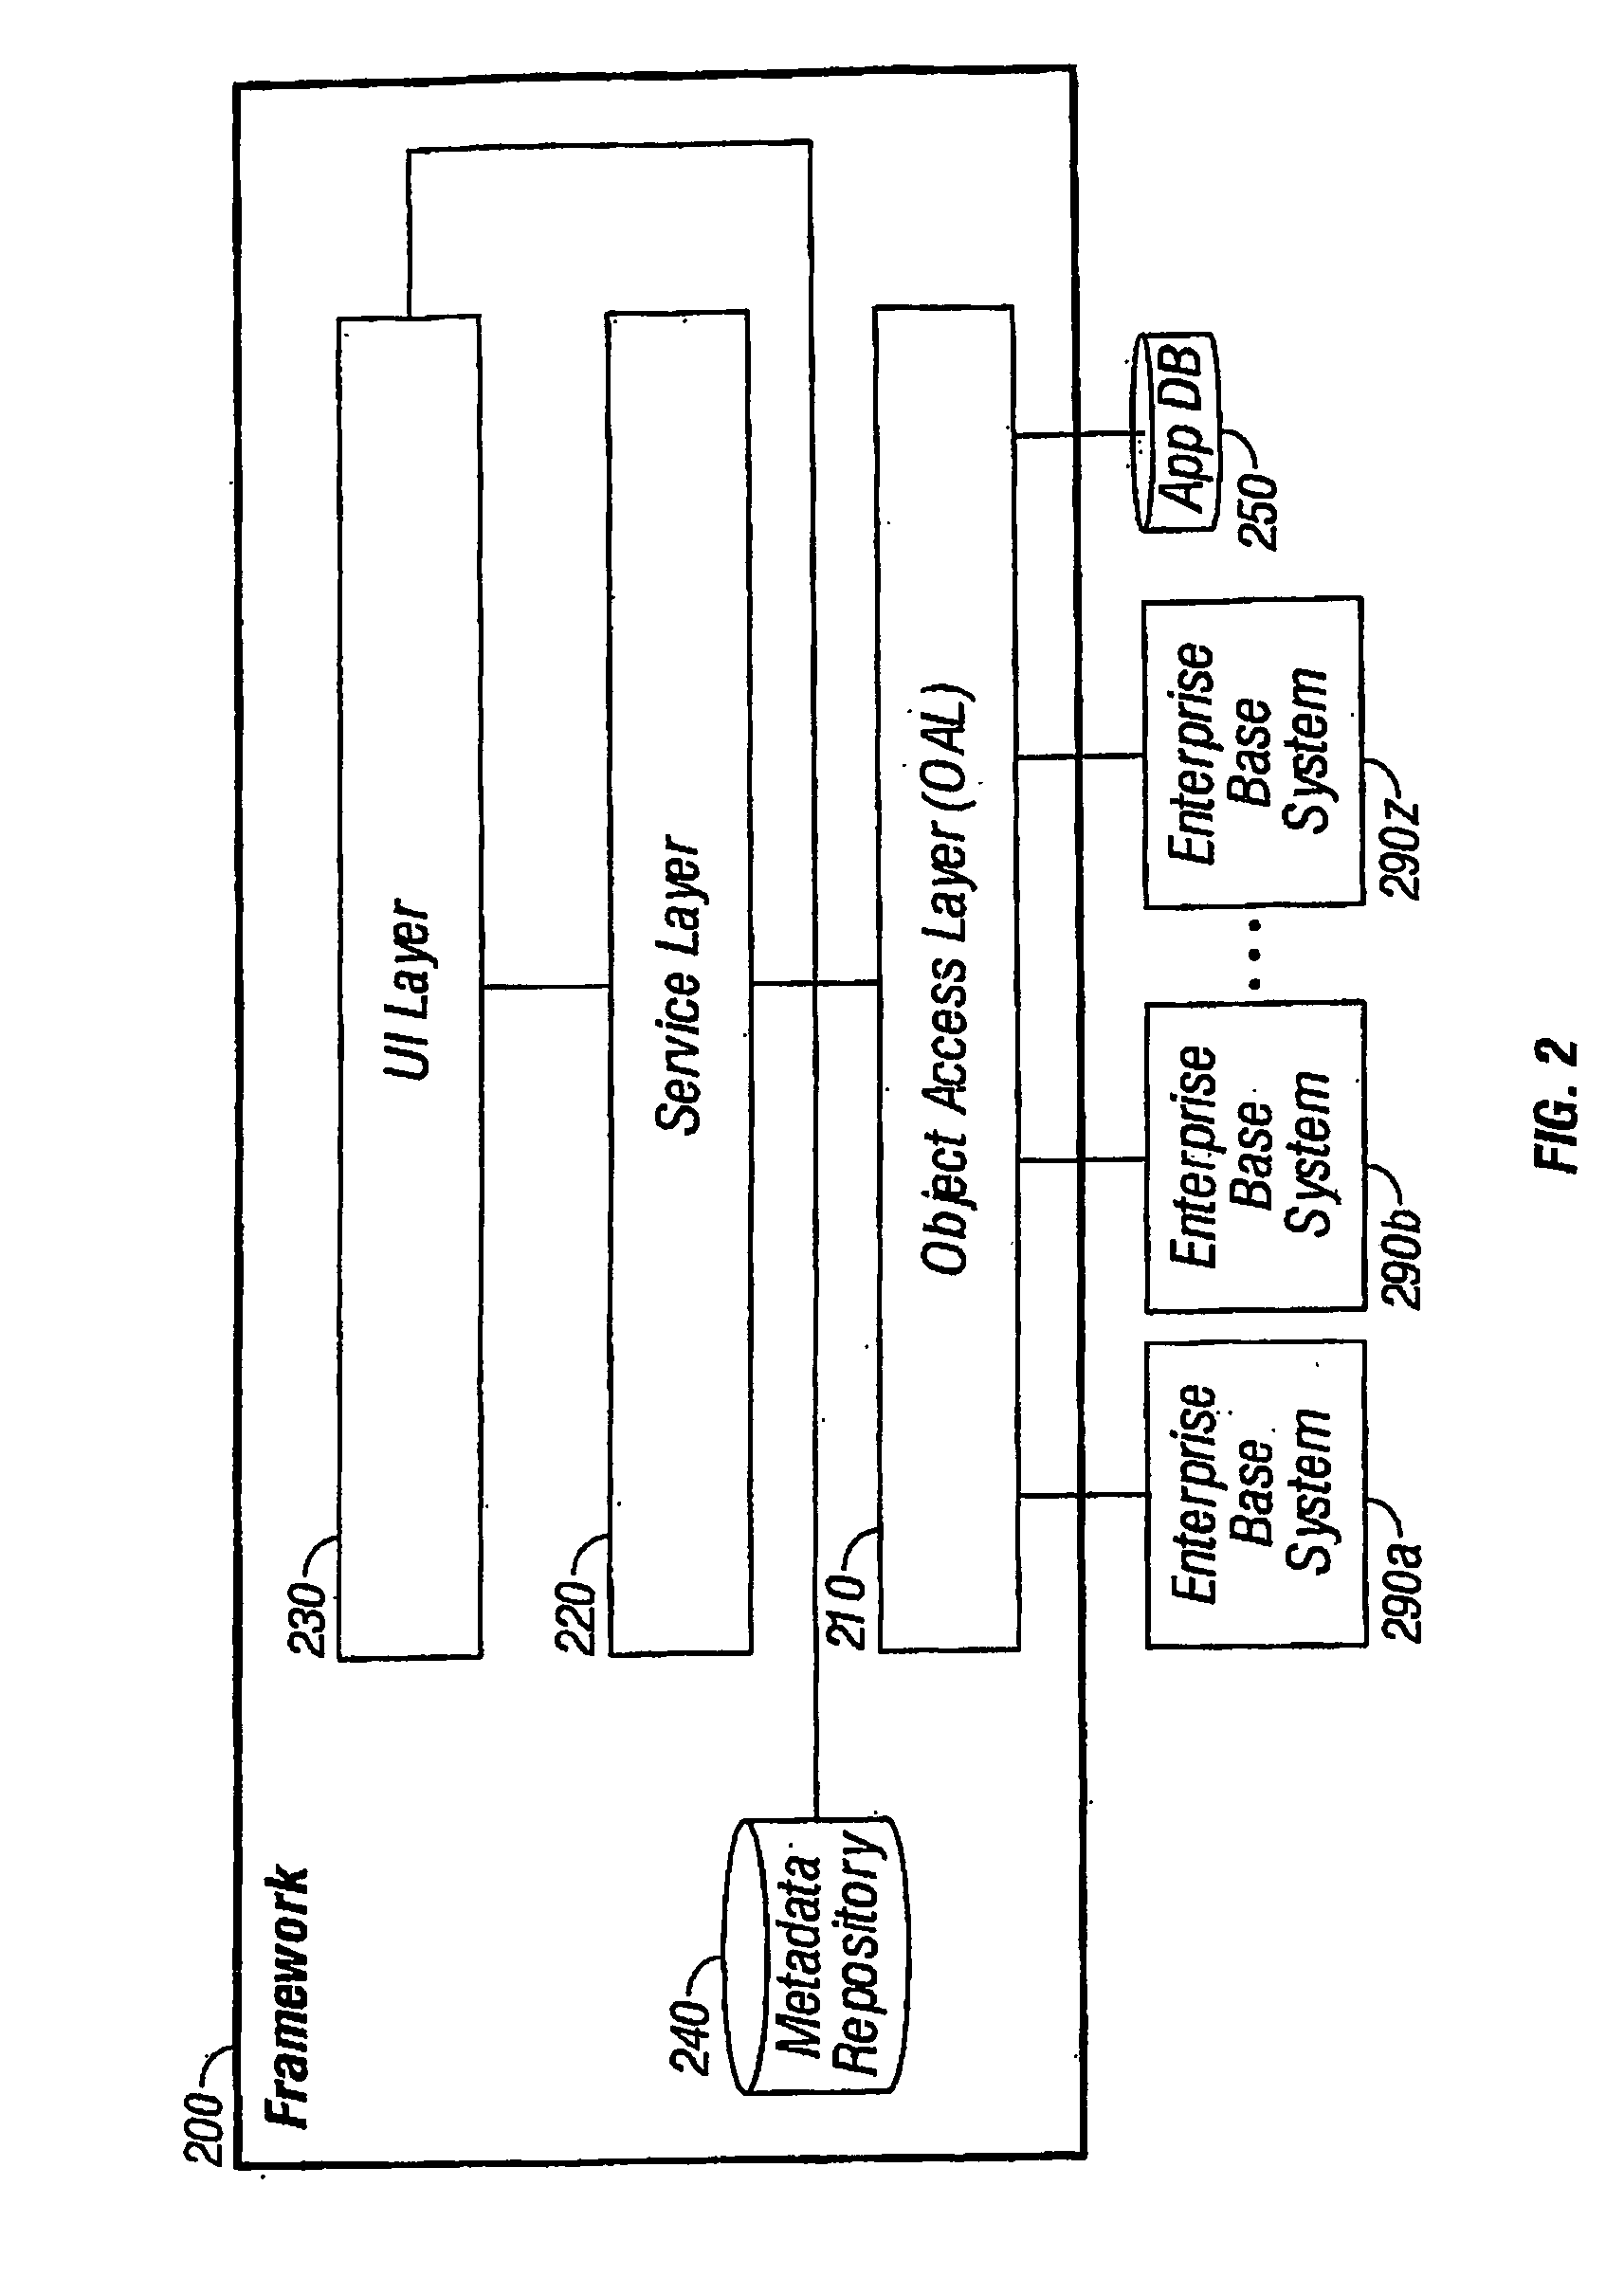 Framework for a composite application and a method of implementing a frame work for a composite application